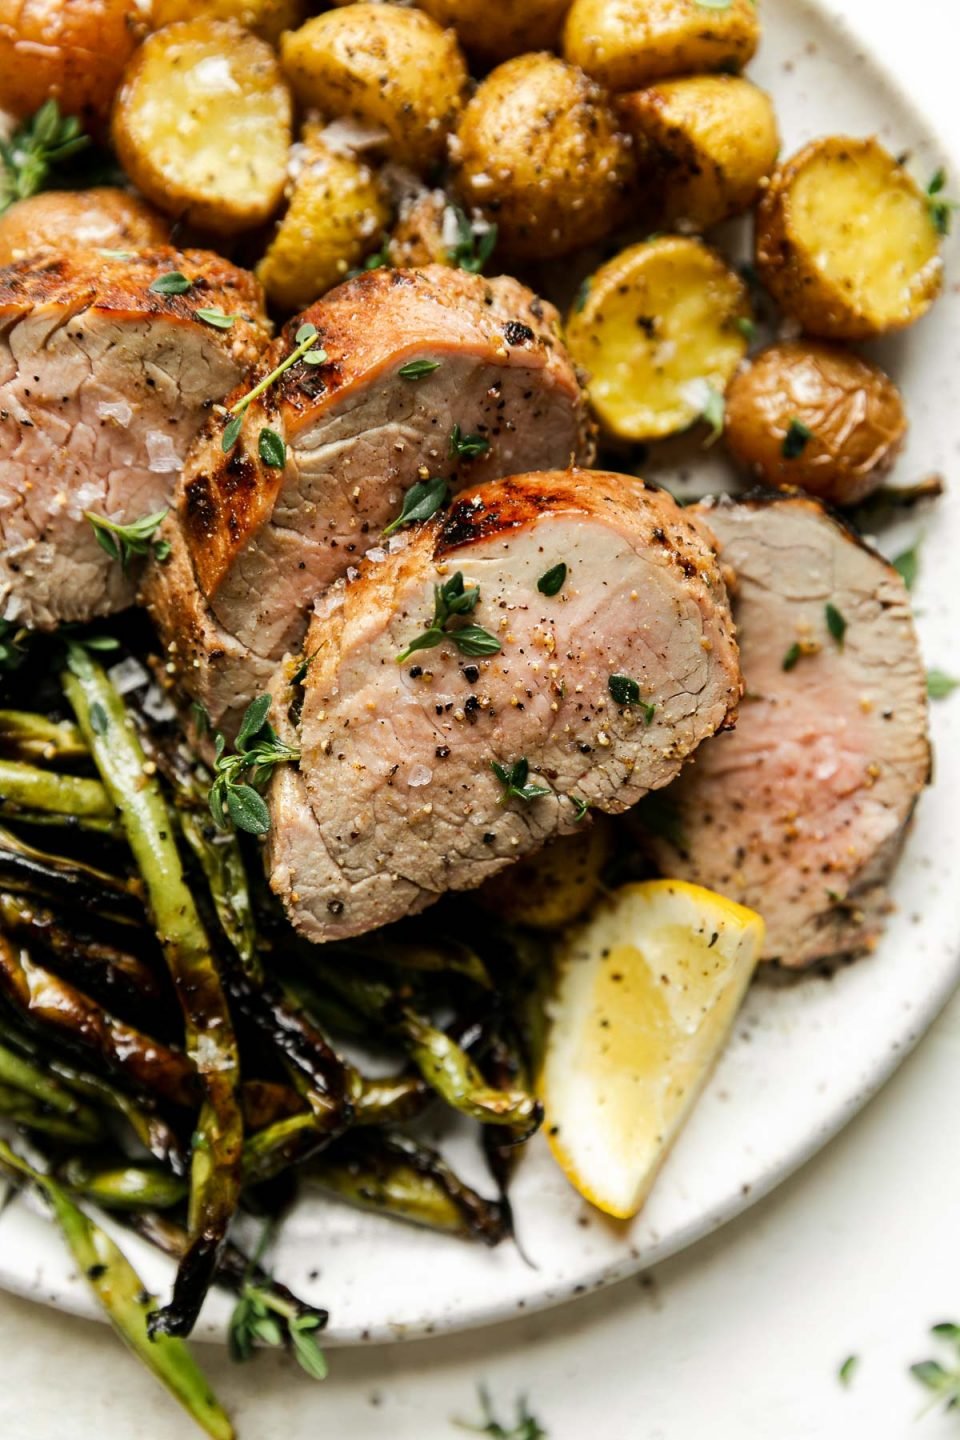 Lemon Garlic Grilled Pork Tenderloin on a white speckled ceramic plate. The tenderloin is sliced in medallions and garnished with fresh herbs. It's plated with baby golden potatoes, char-grilled green beans, & a lemon wedge. The plate sits atop a creamy cement surface.